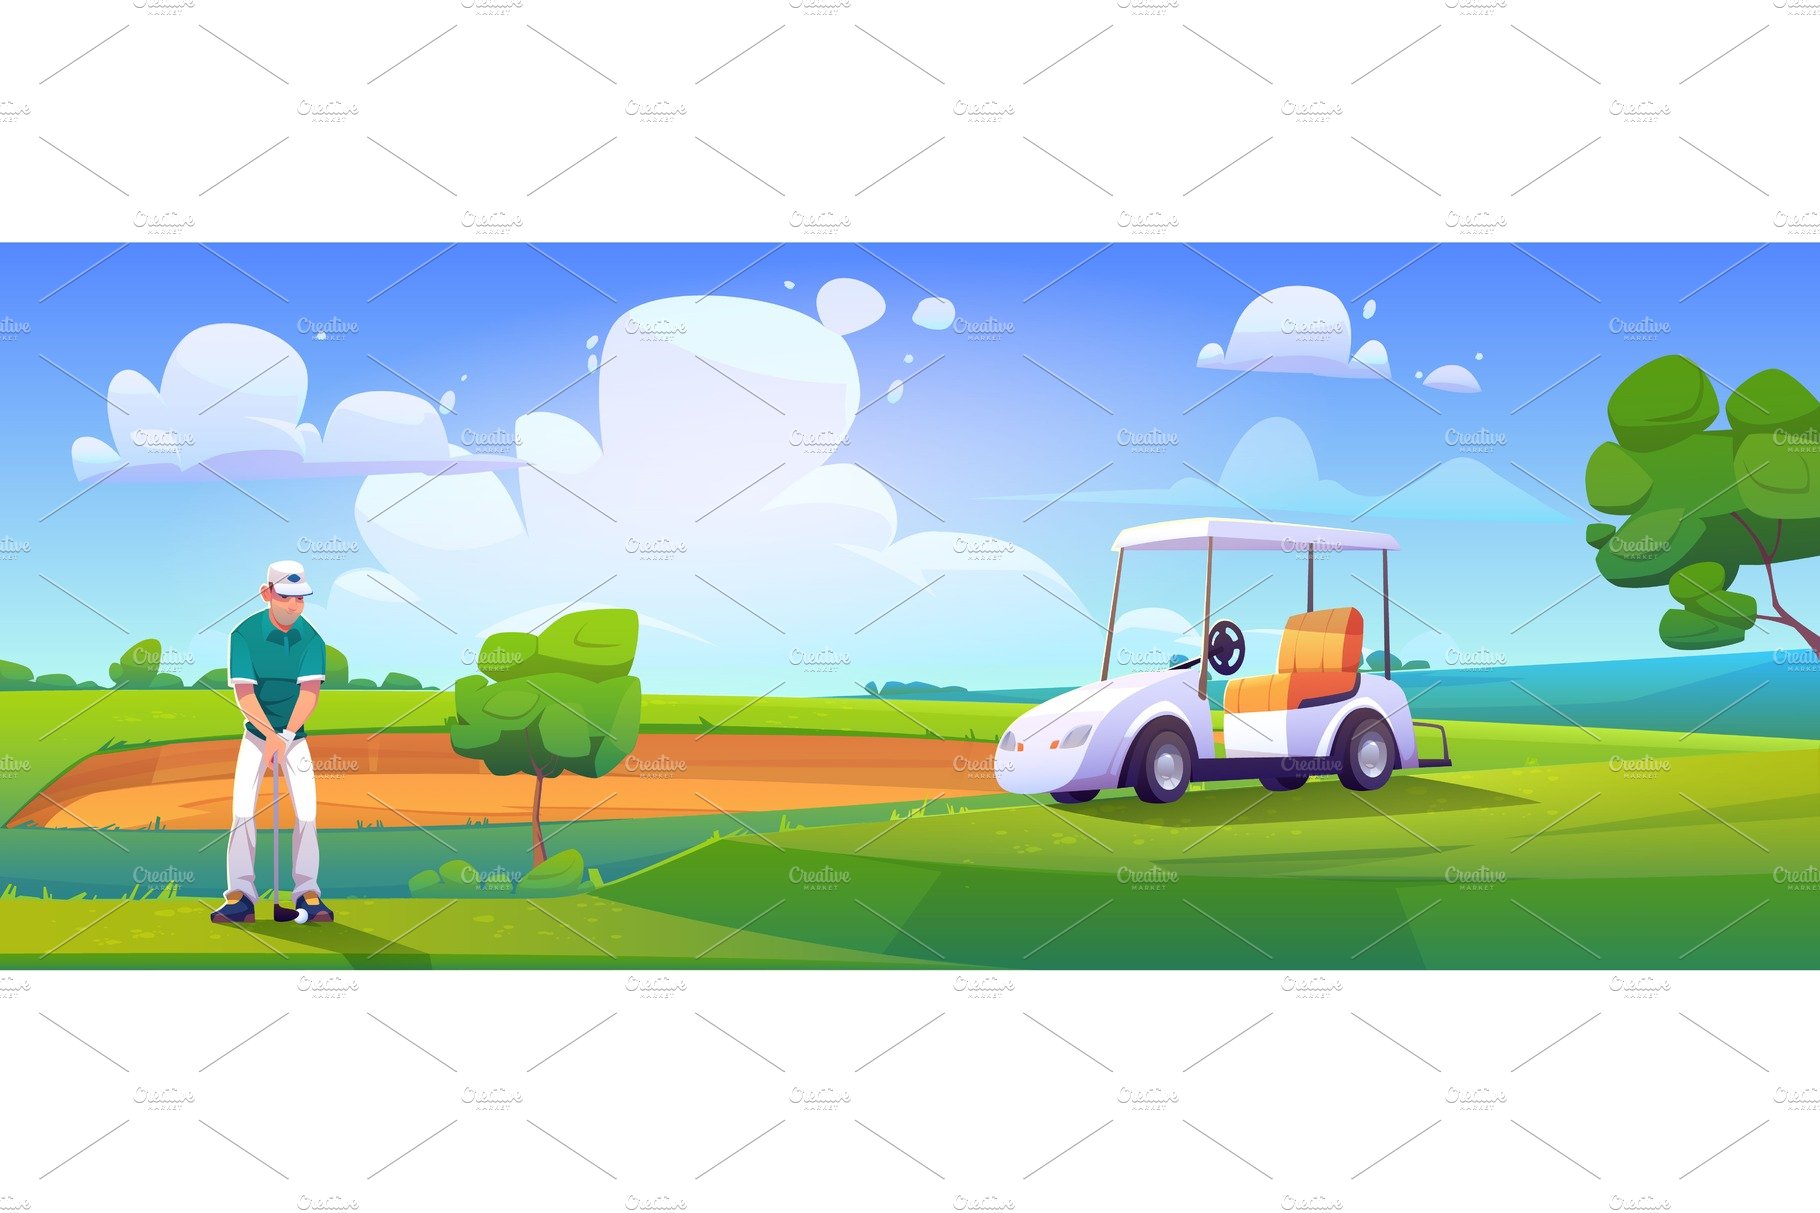 Golfer playing golf on green field cover image.